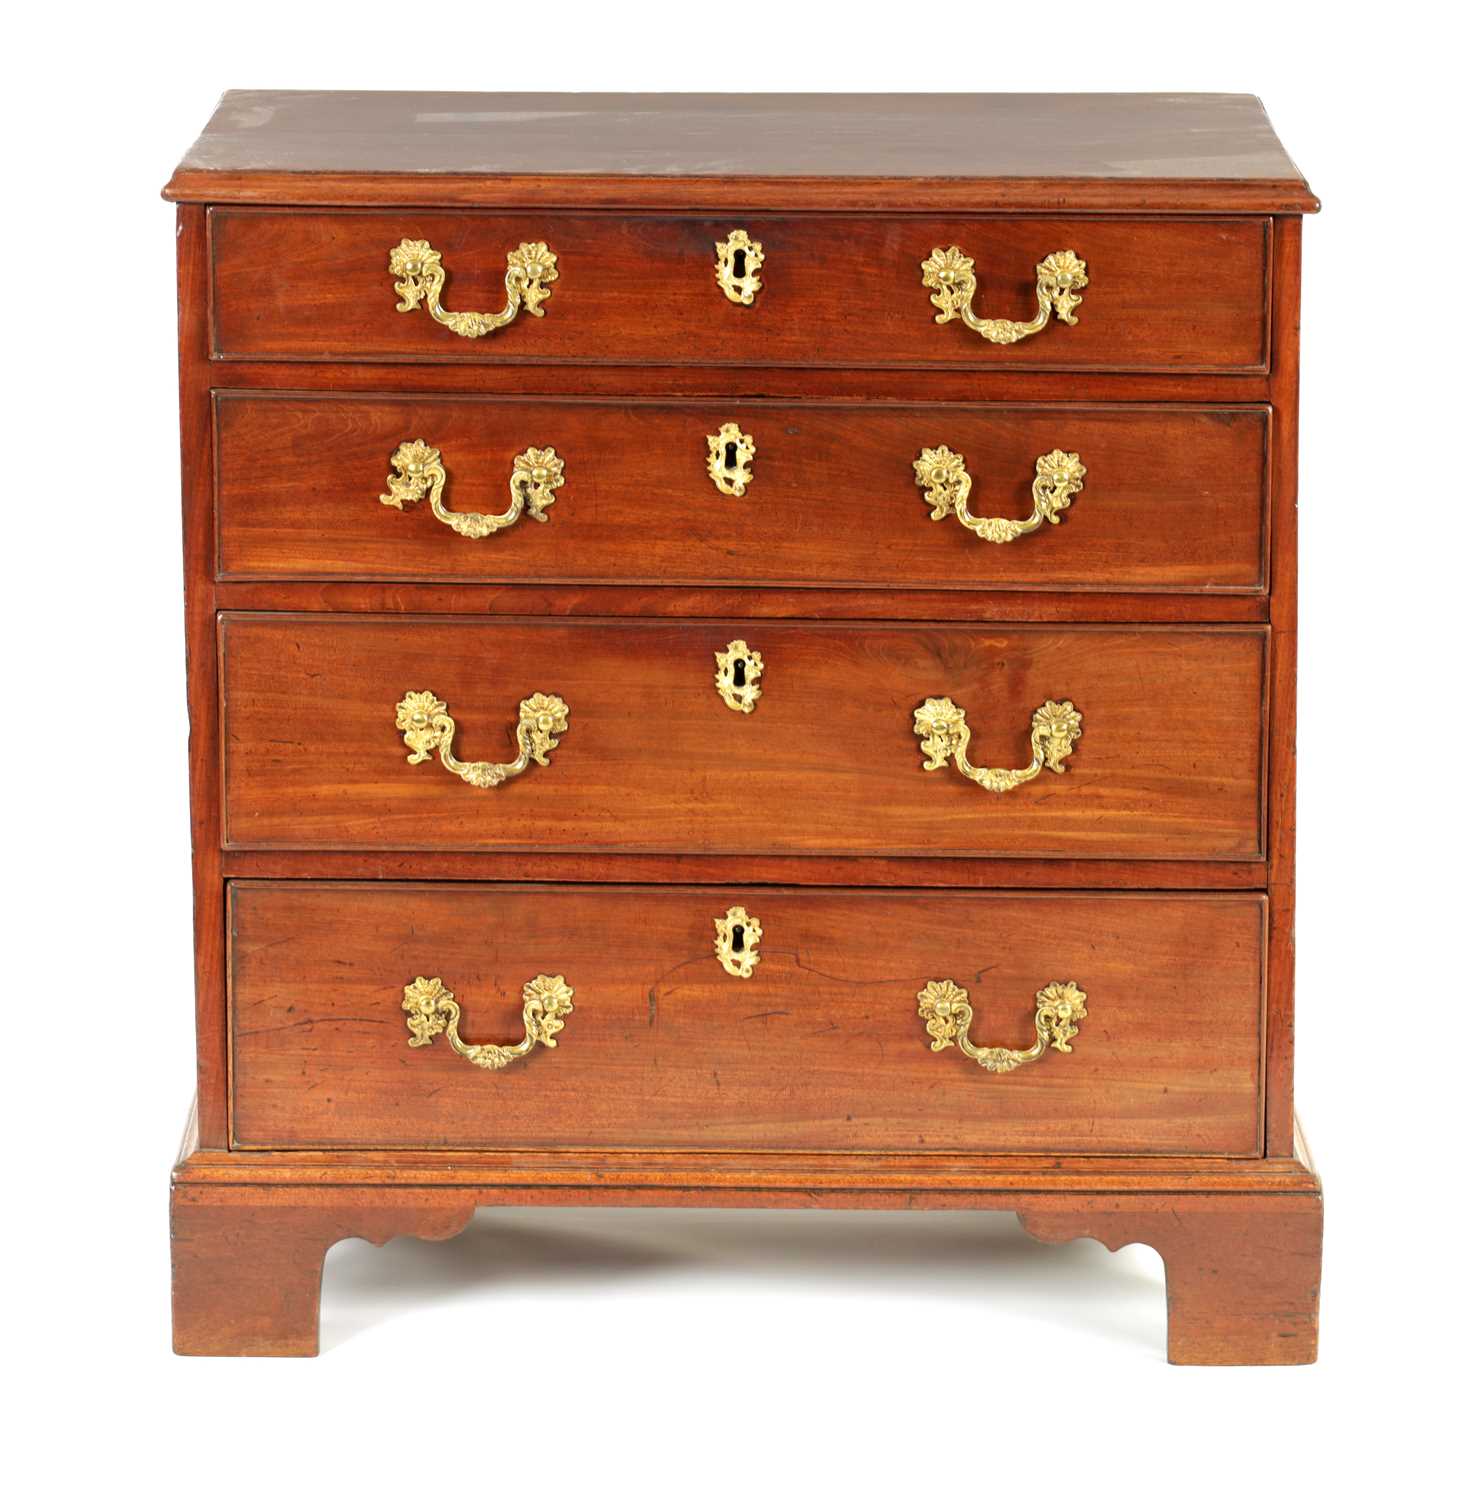 Lot 1066 - A GOOD EARLY GEORGE III MAHOGANY SMALL CHEST